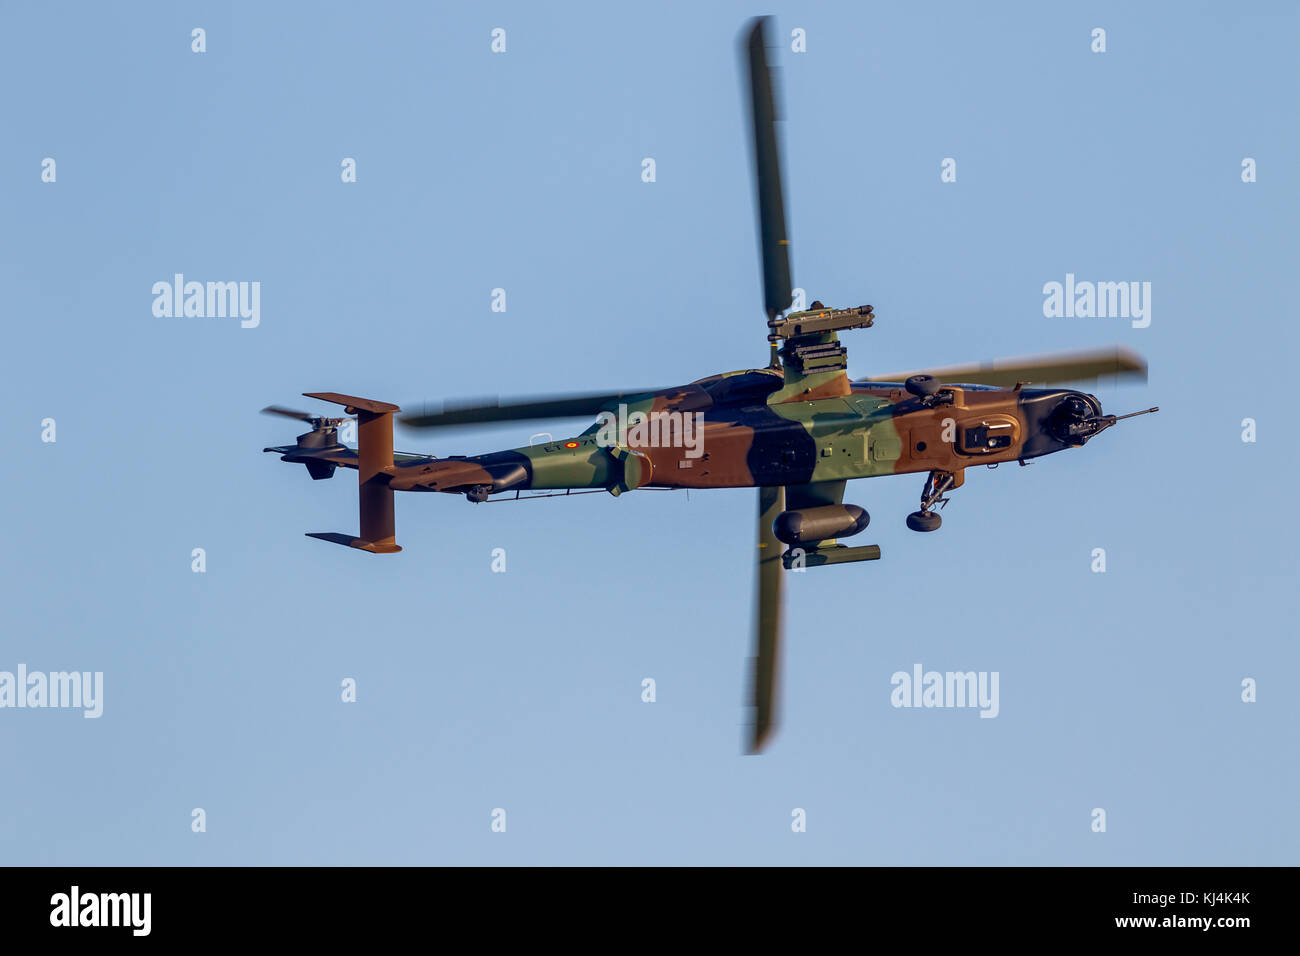 TORRE DEL MAR, MALAGA, SPAIN-JUL 29: Helicopter Eurocopter EC665 Tiger taking part in a exhibition on the 2nd airshow of Torre del Mar on July 29, 201 Stock Photo